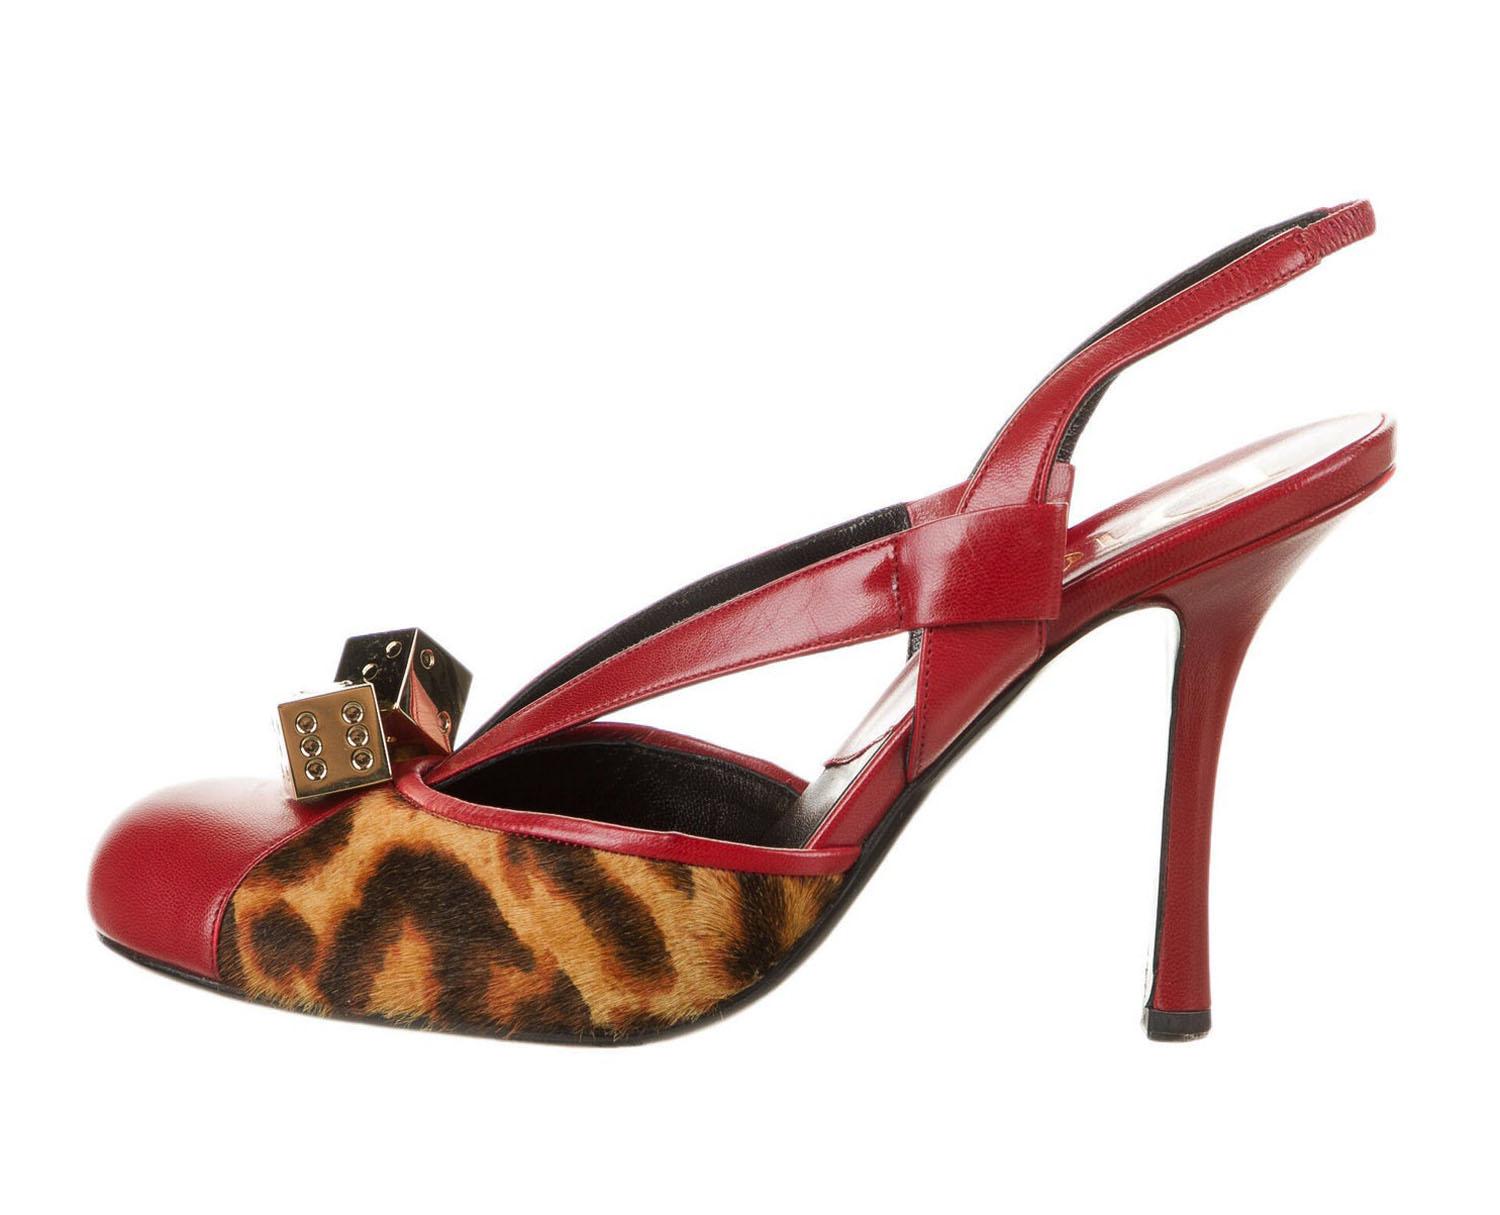 New Christian Dior *The Gambler* Shoes Sandals
This Sandals Match to the Famous Dior *The Gambler* Handbag from the same Collection.
Designer size - 38
John Galliano for Christian Dior F/W 2004 Collection
Red Leather, Leopard Print Pony Hair, Gold